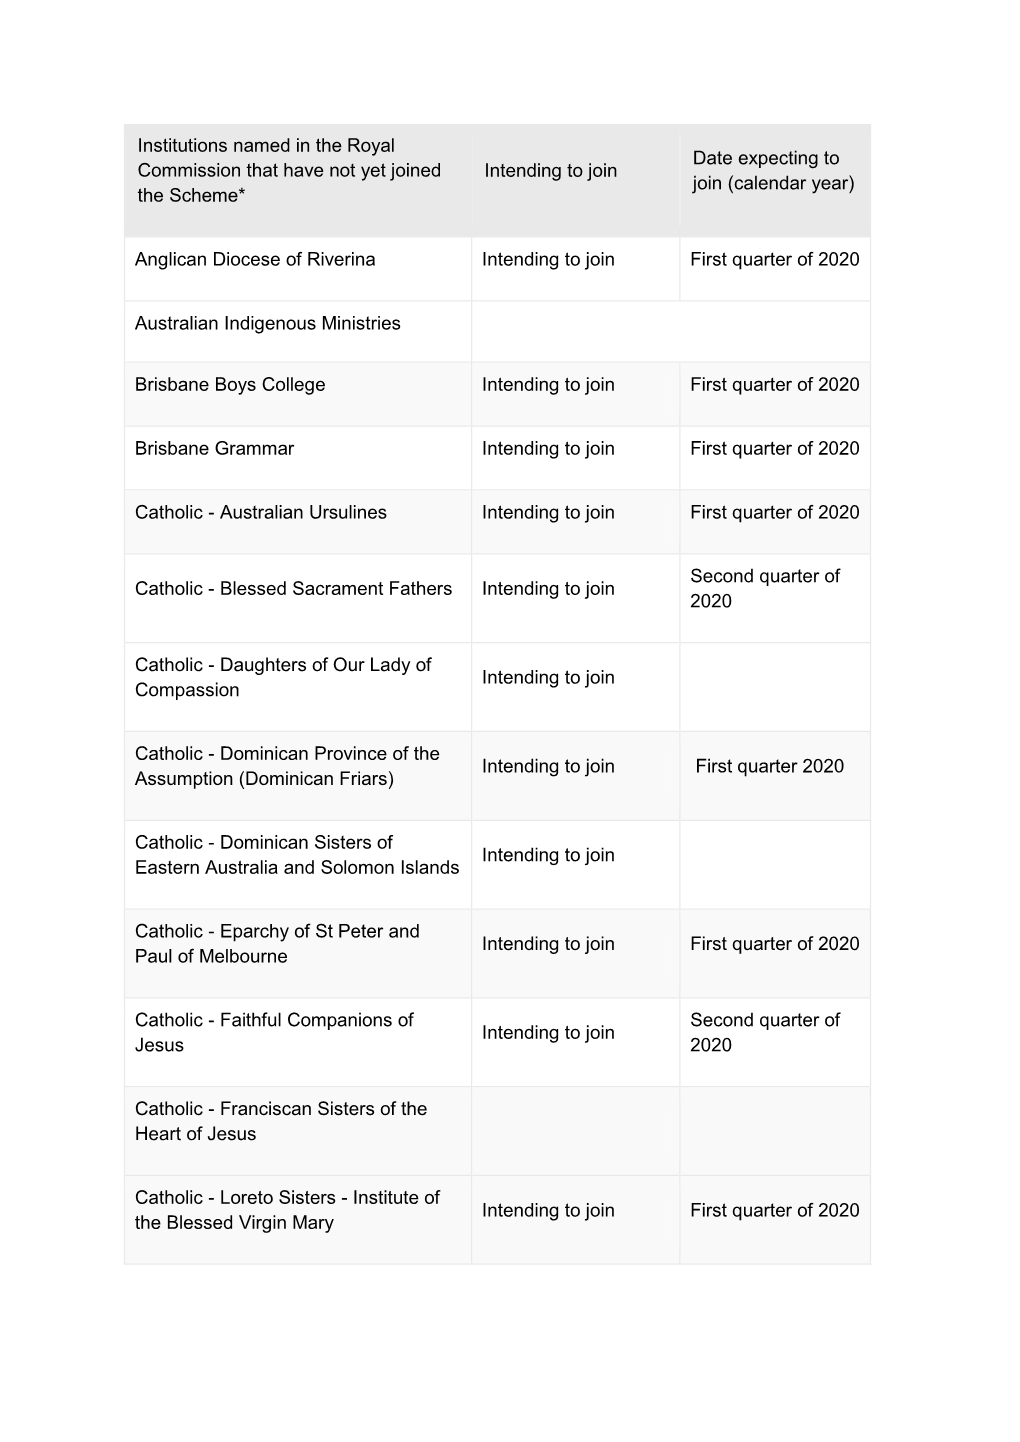 Institutions Named in the Royal Commission That Have Not Yet